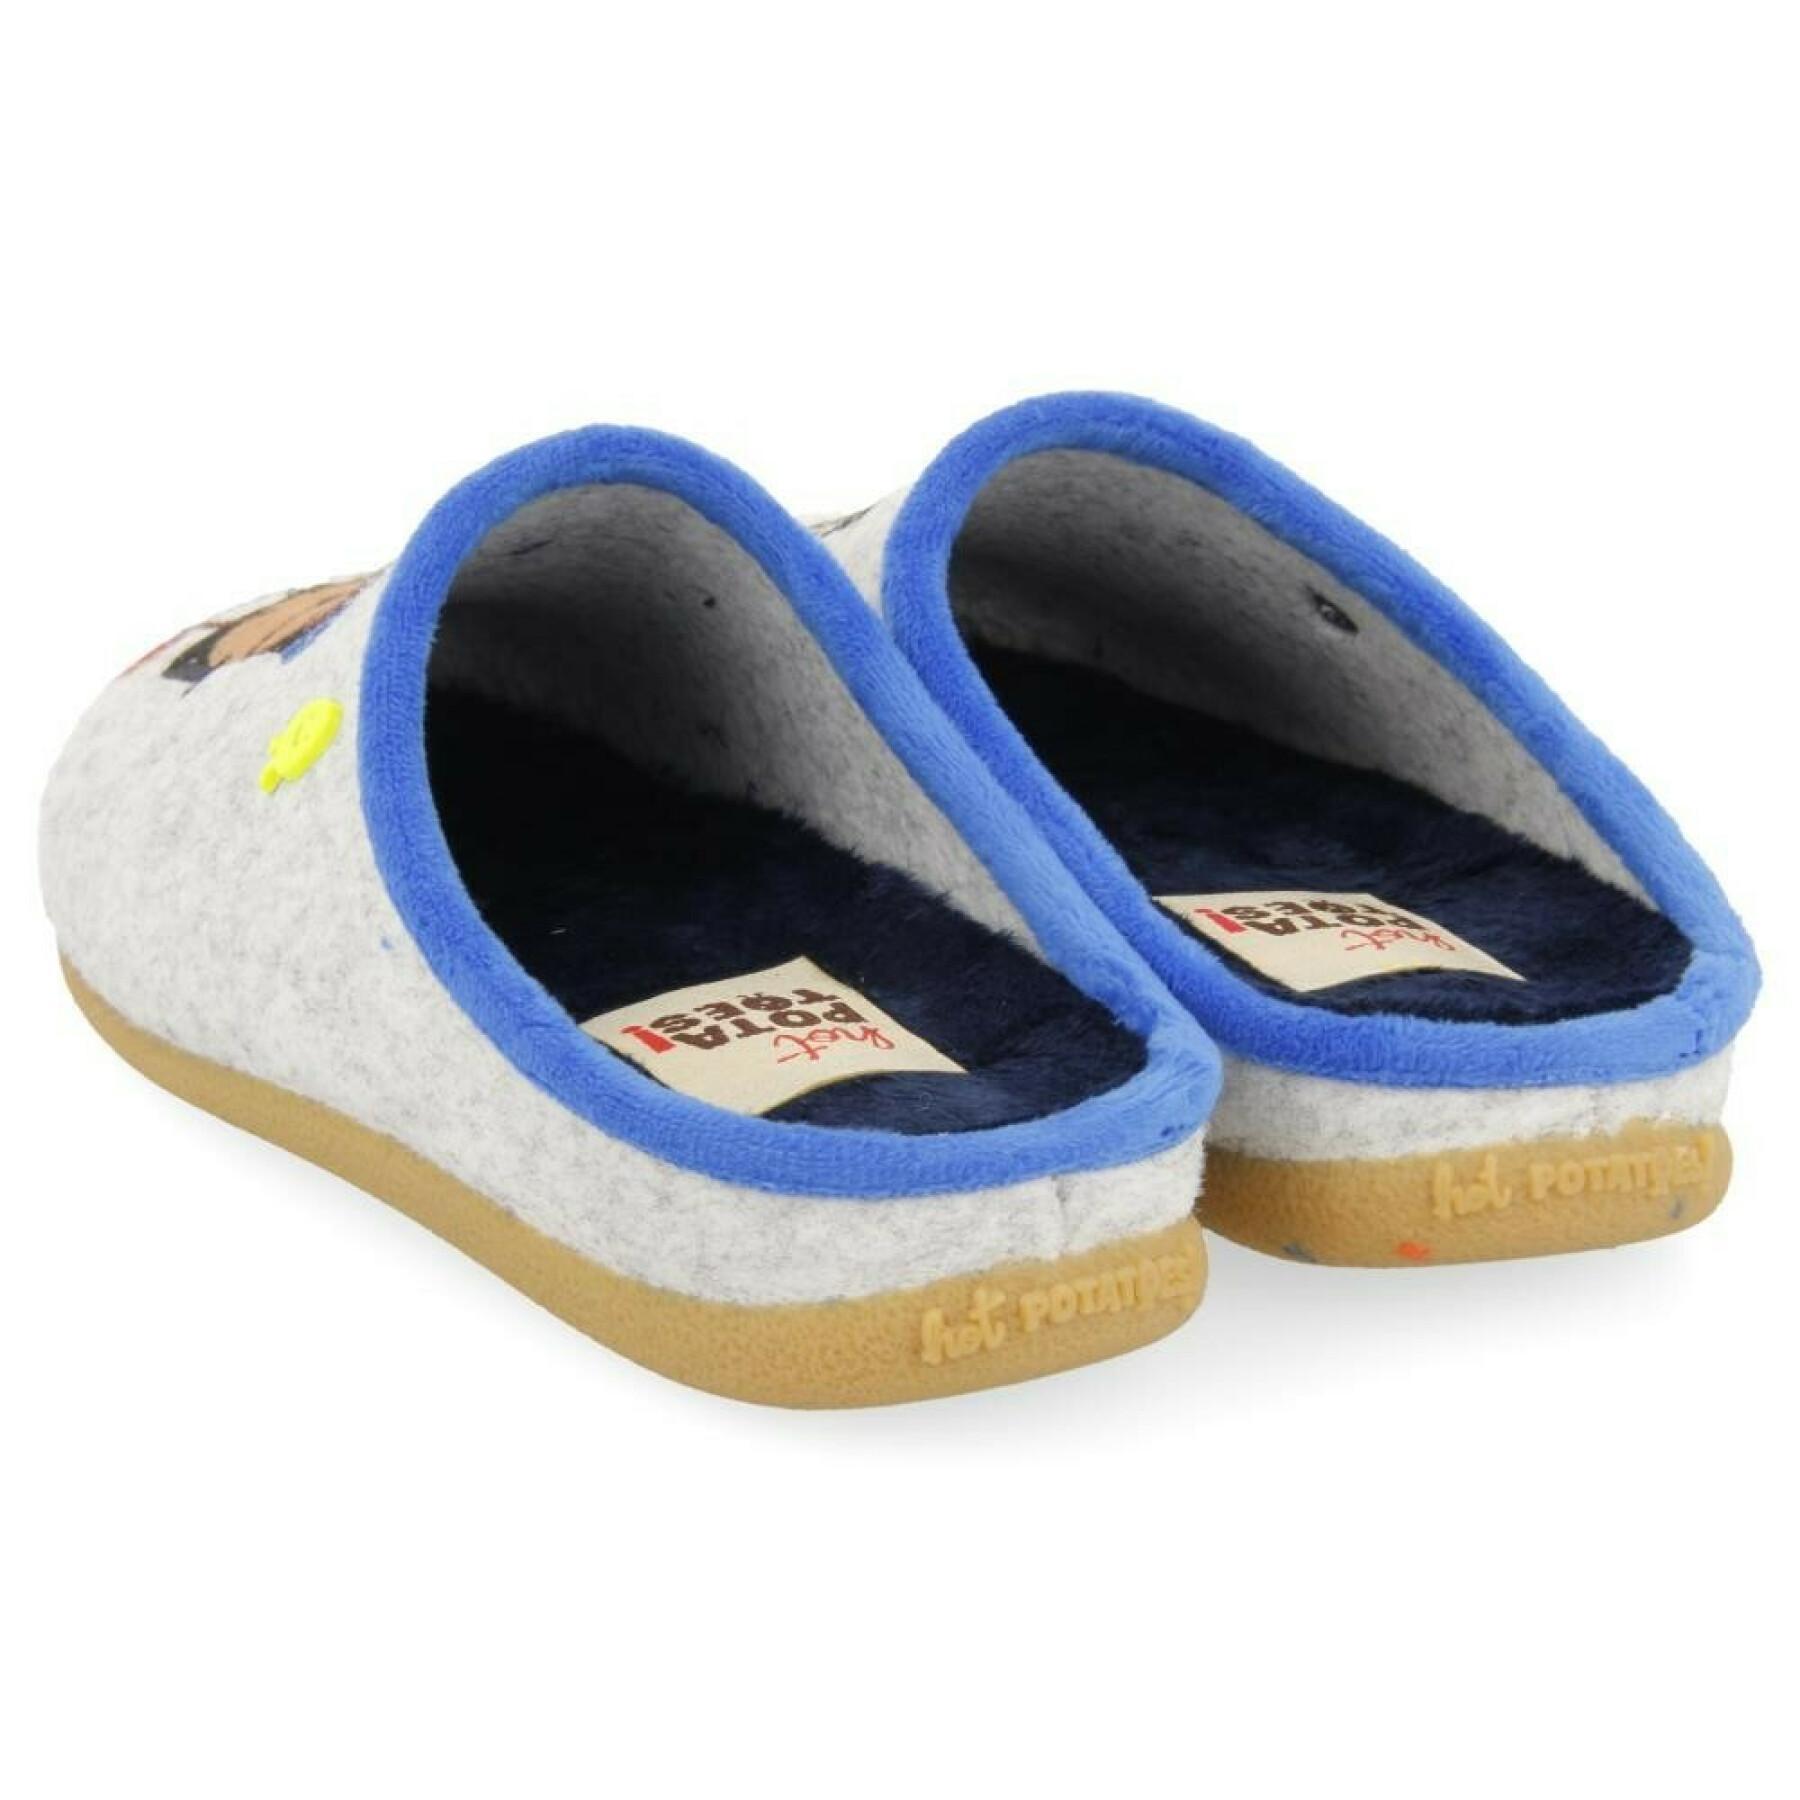 Slippers from the children's collection Hot Potatoes glanegg